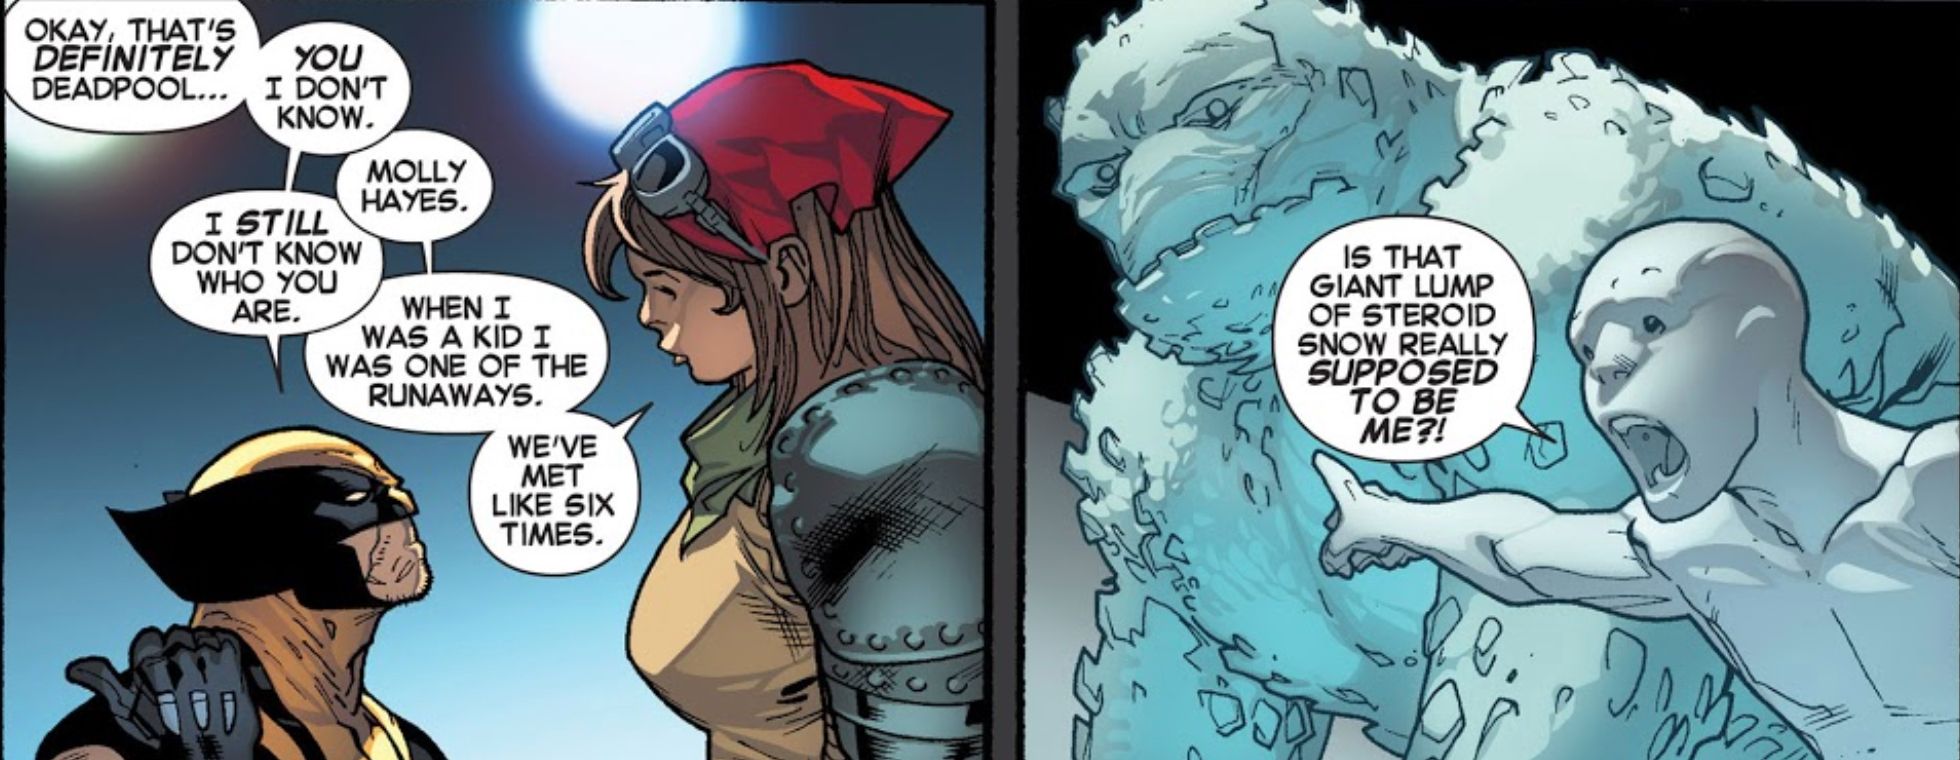 Molly Hayes as an Imposter X-Men from the future in Battle of the Atom